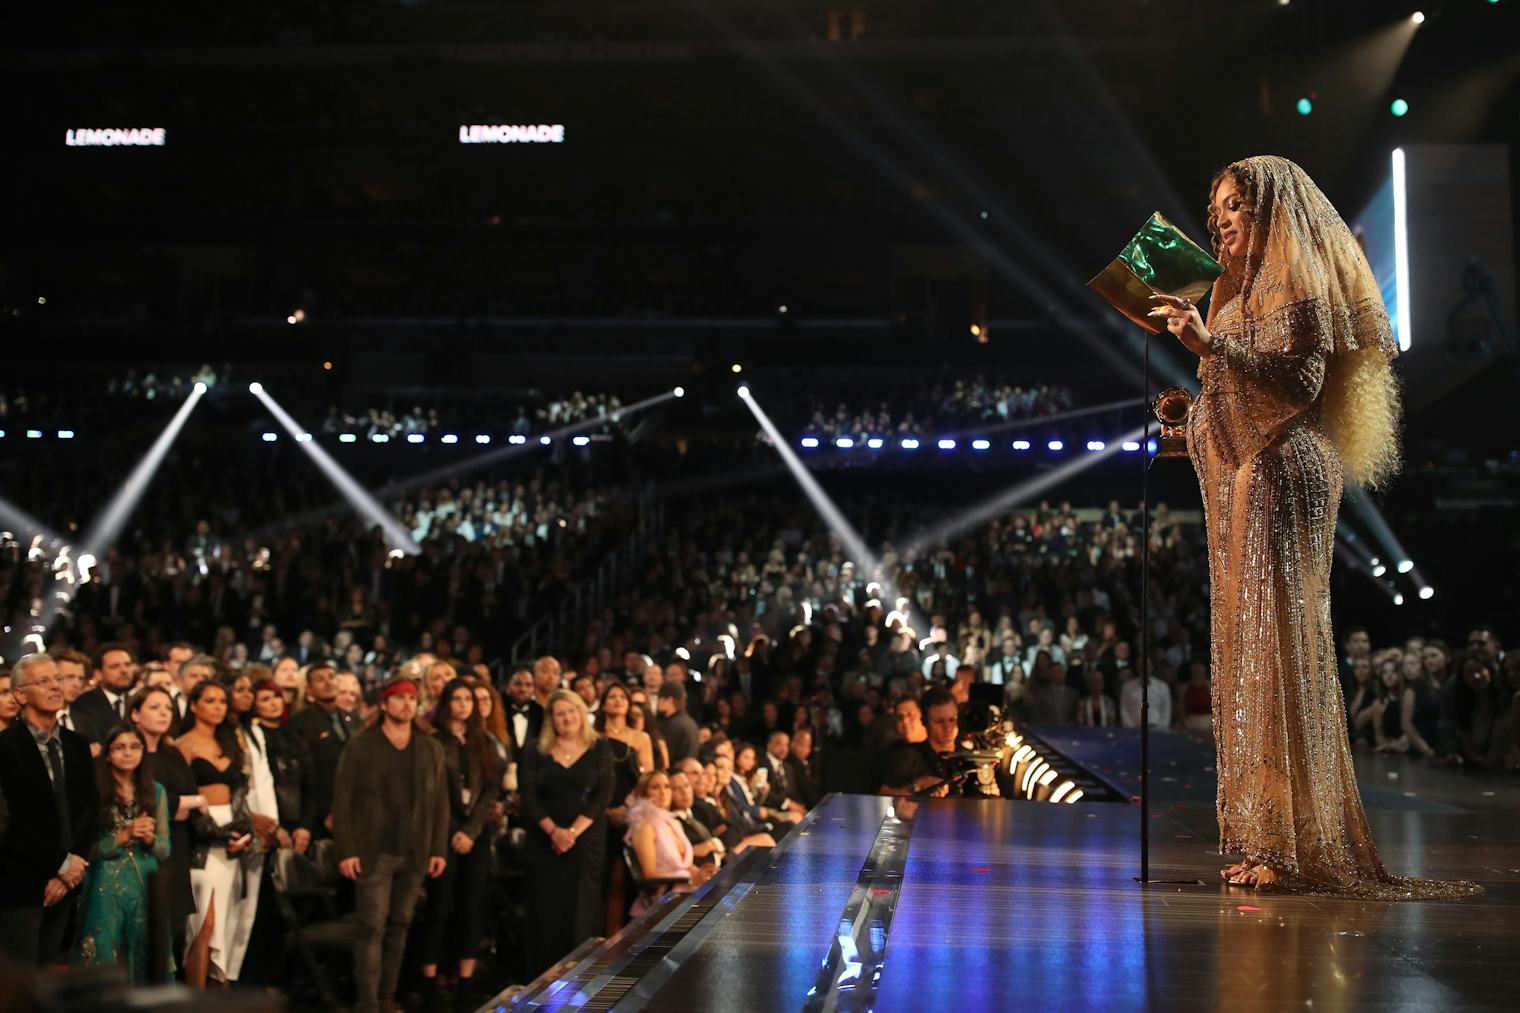 How Many Black Artists Have Won Album Of The Year At The Grammys? Too Few